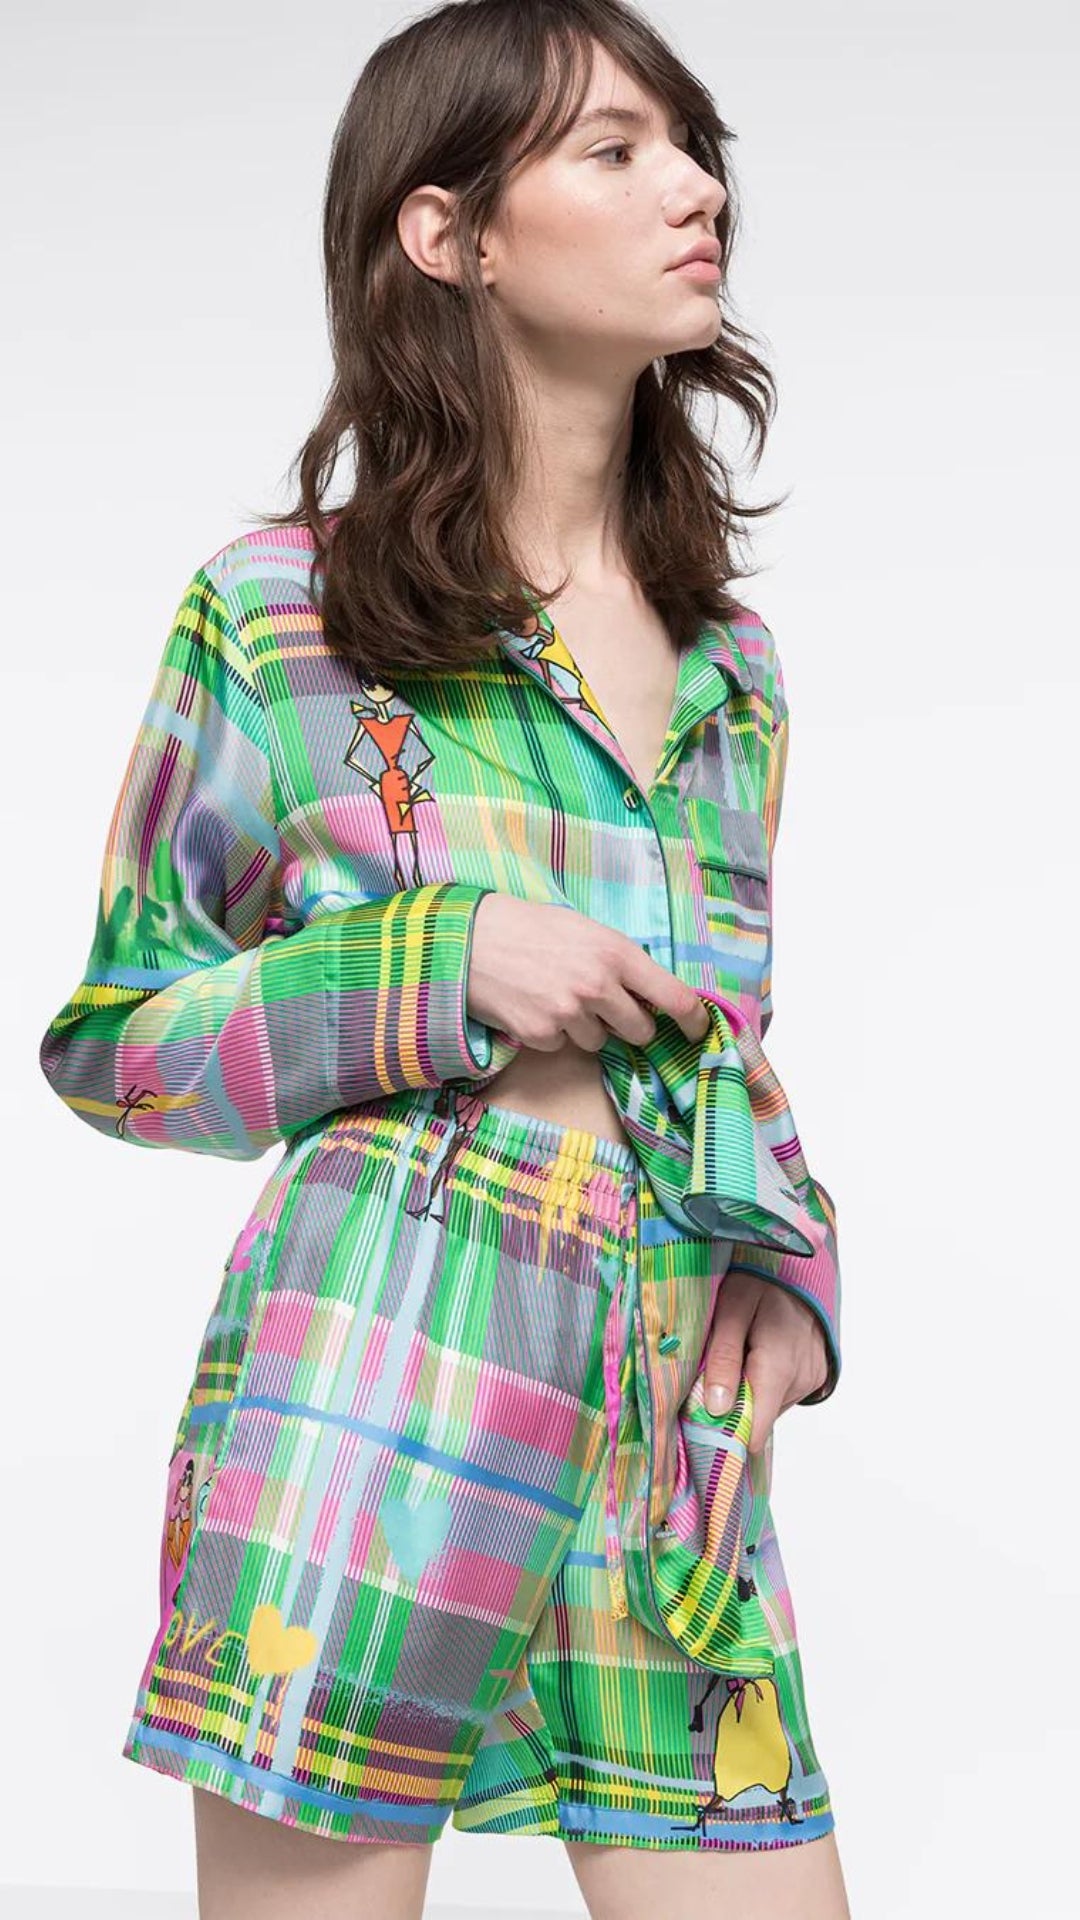 AZ Factory Chromatic Love Silk Blouse. Elastic waist silk shorts in multi color plaid with Alber Elbaz sketches on top. Shown on model facing front.